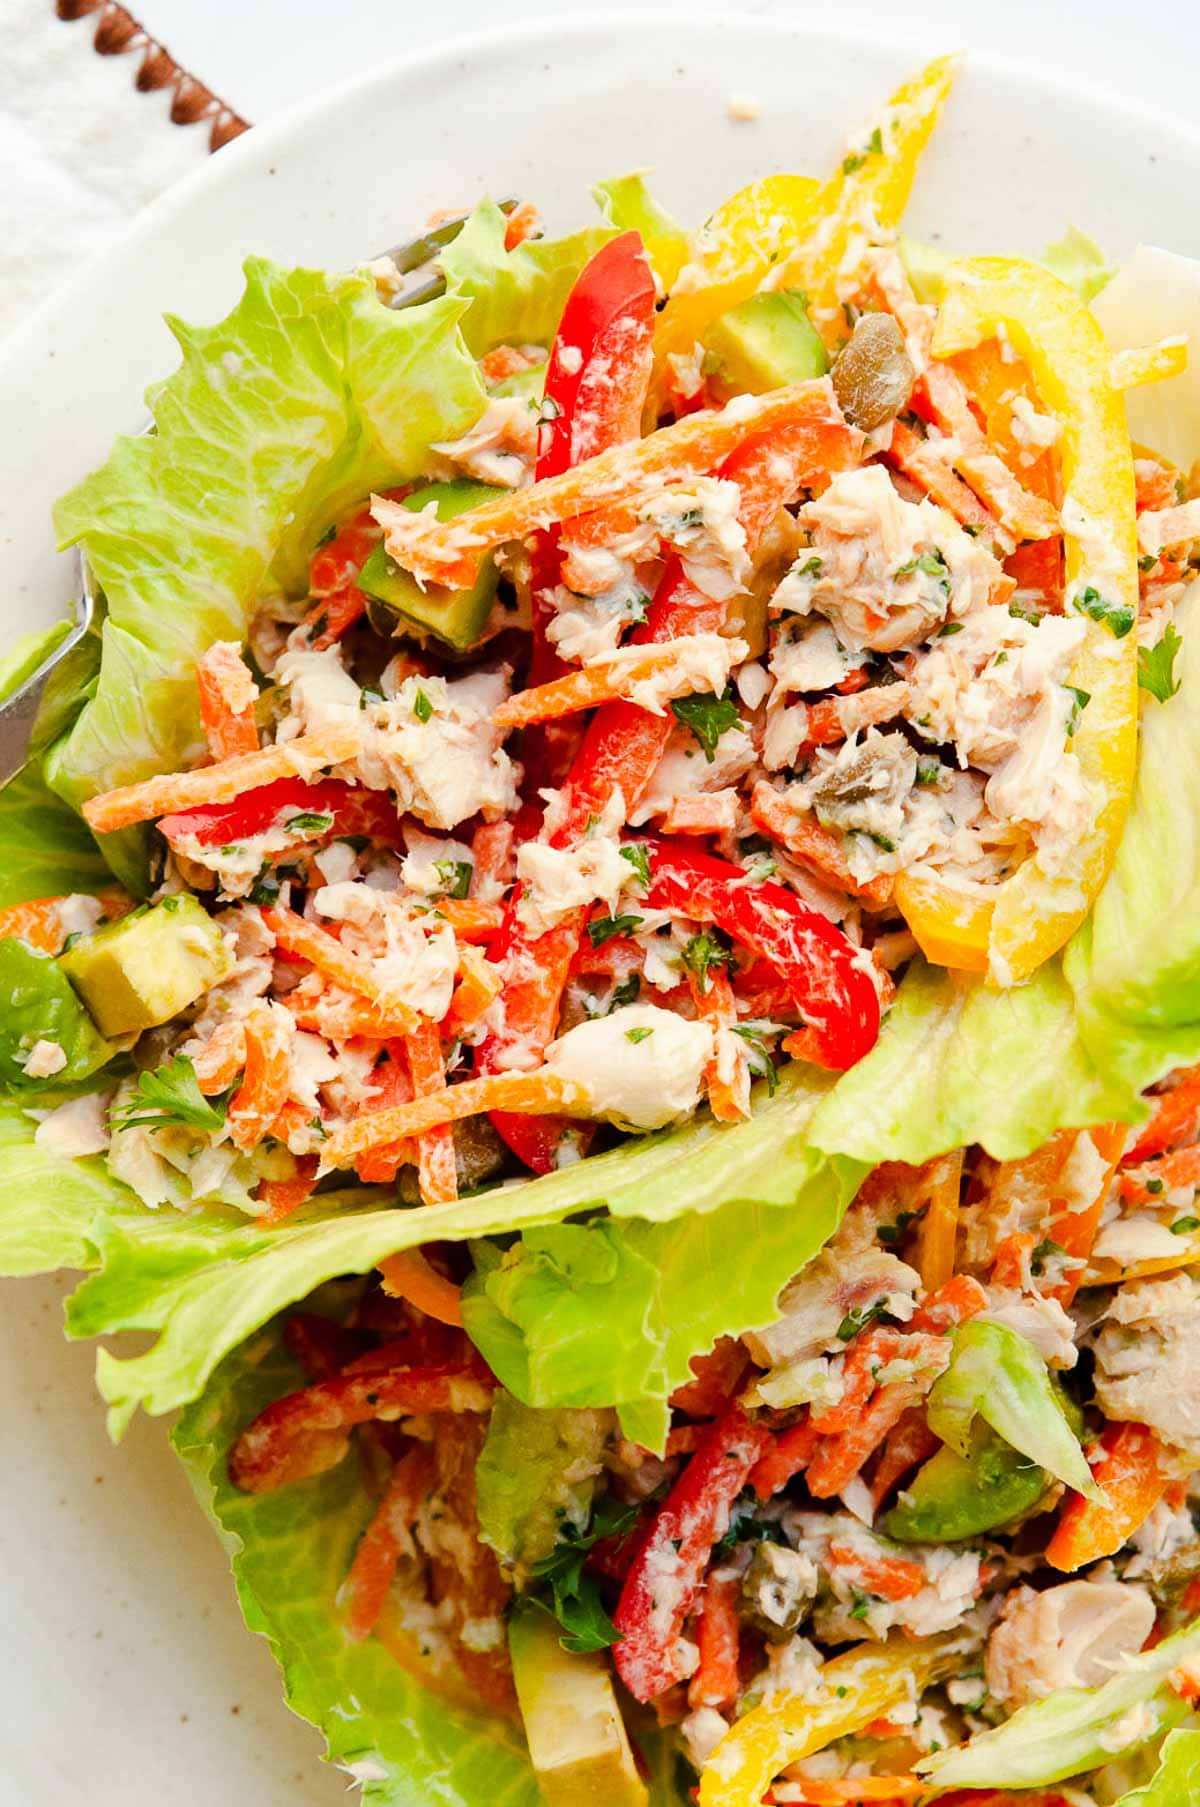 Canned salmon salad in a bowl.